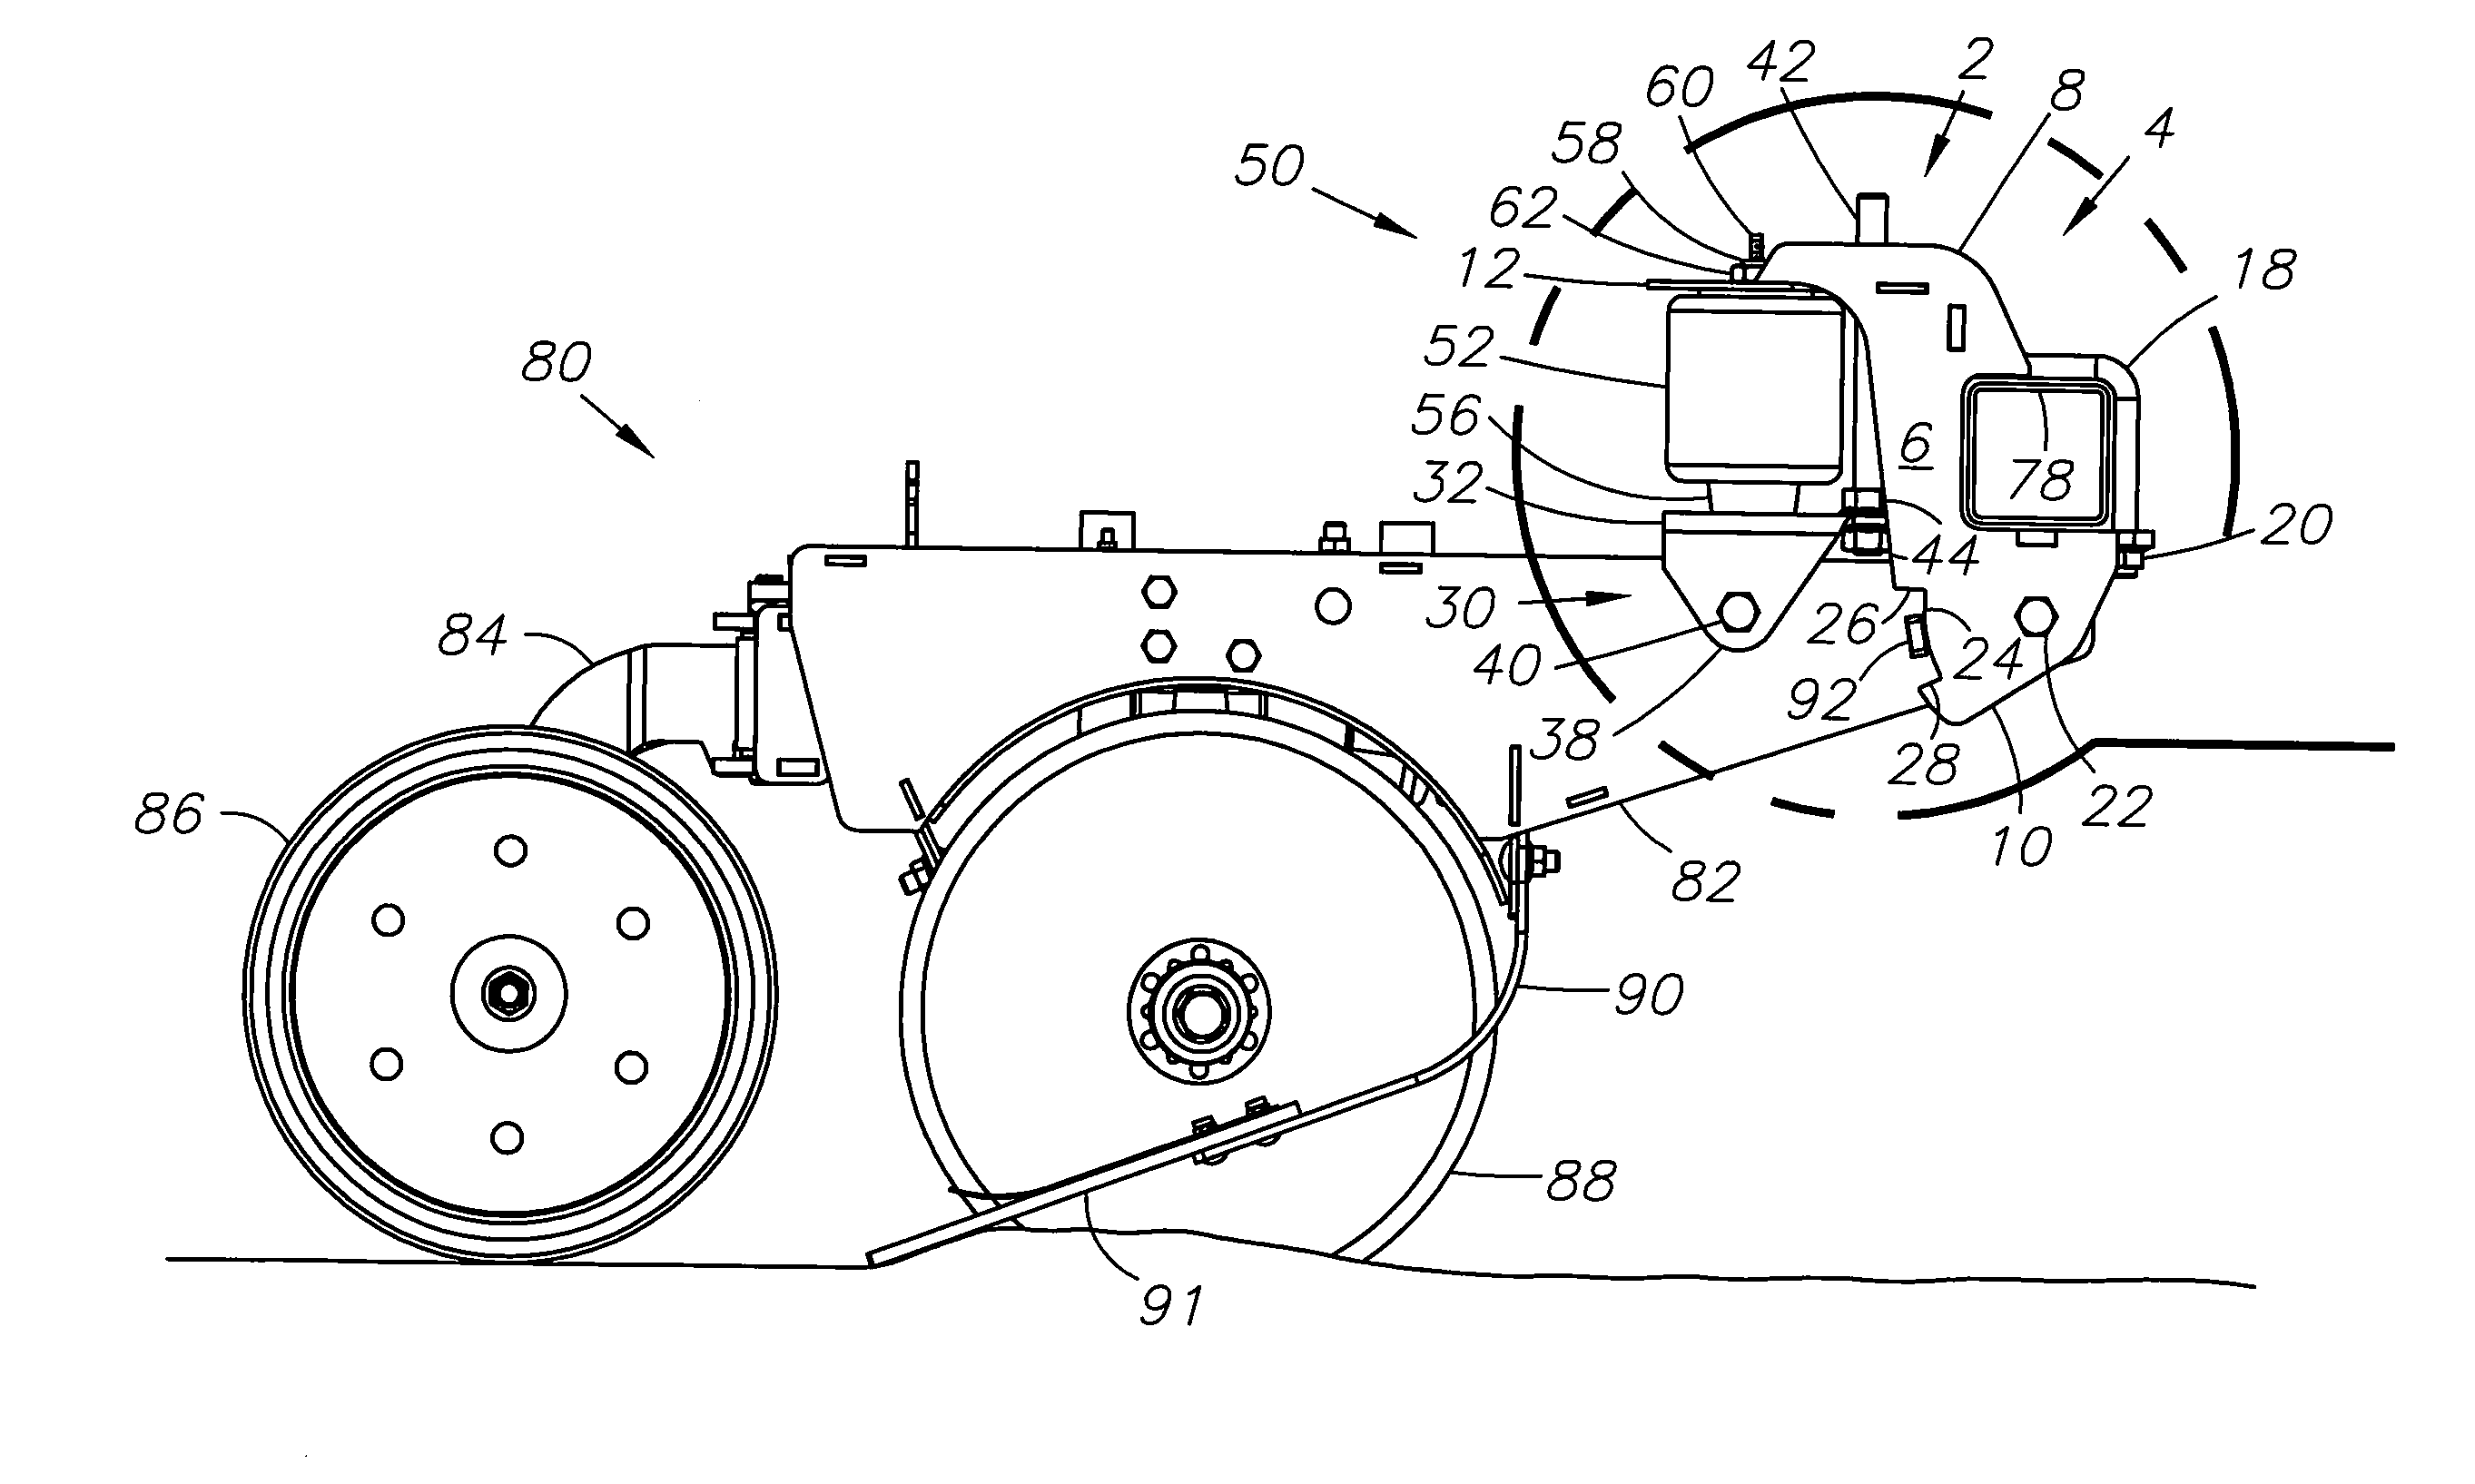 Air spring down-pressure system for implement